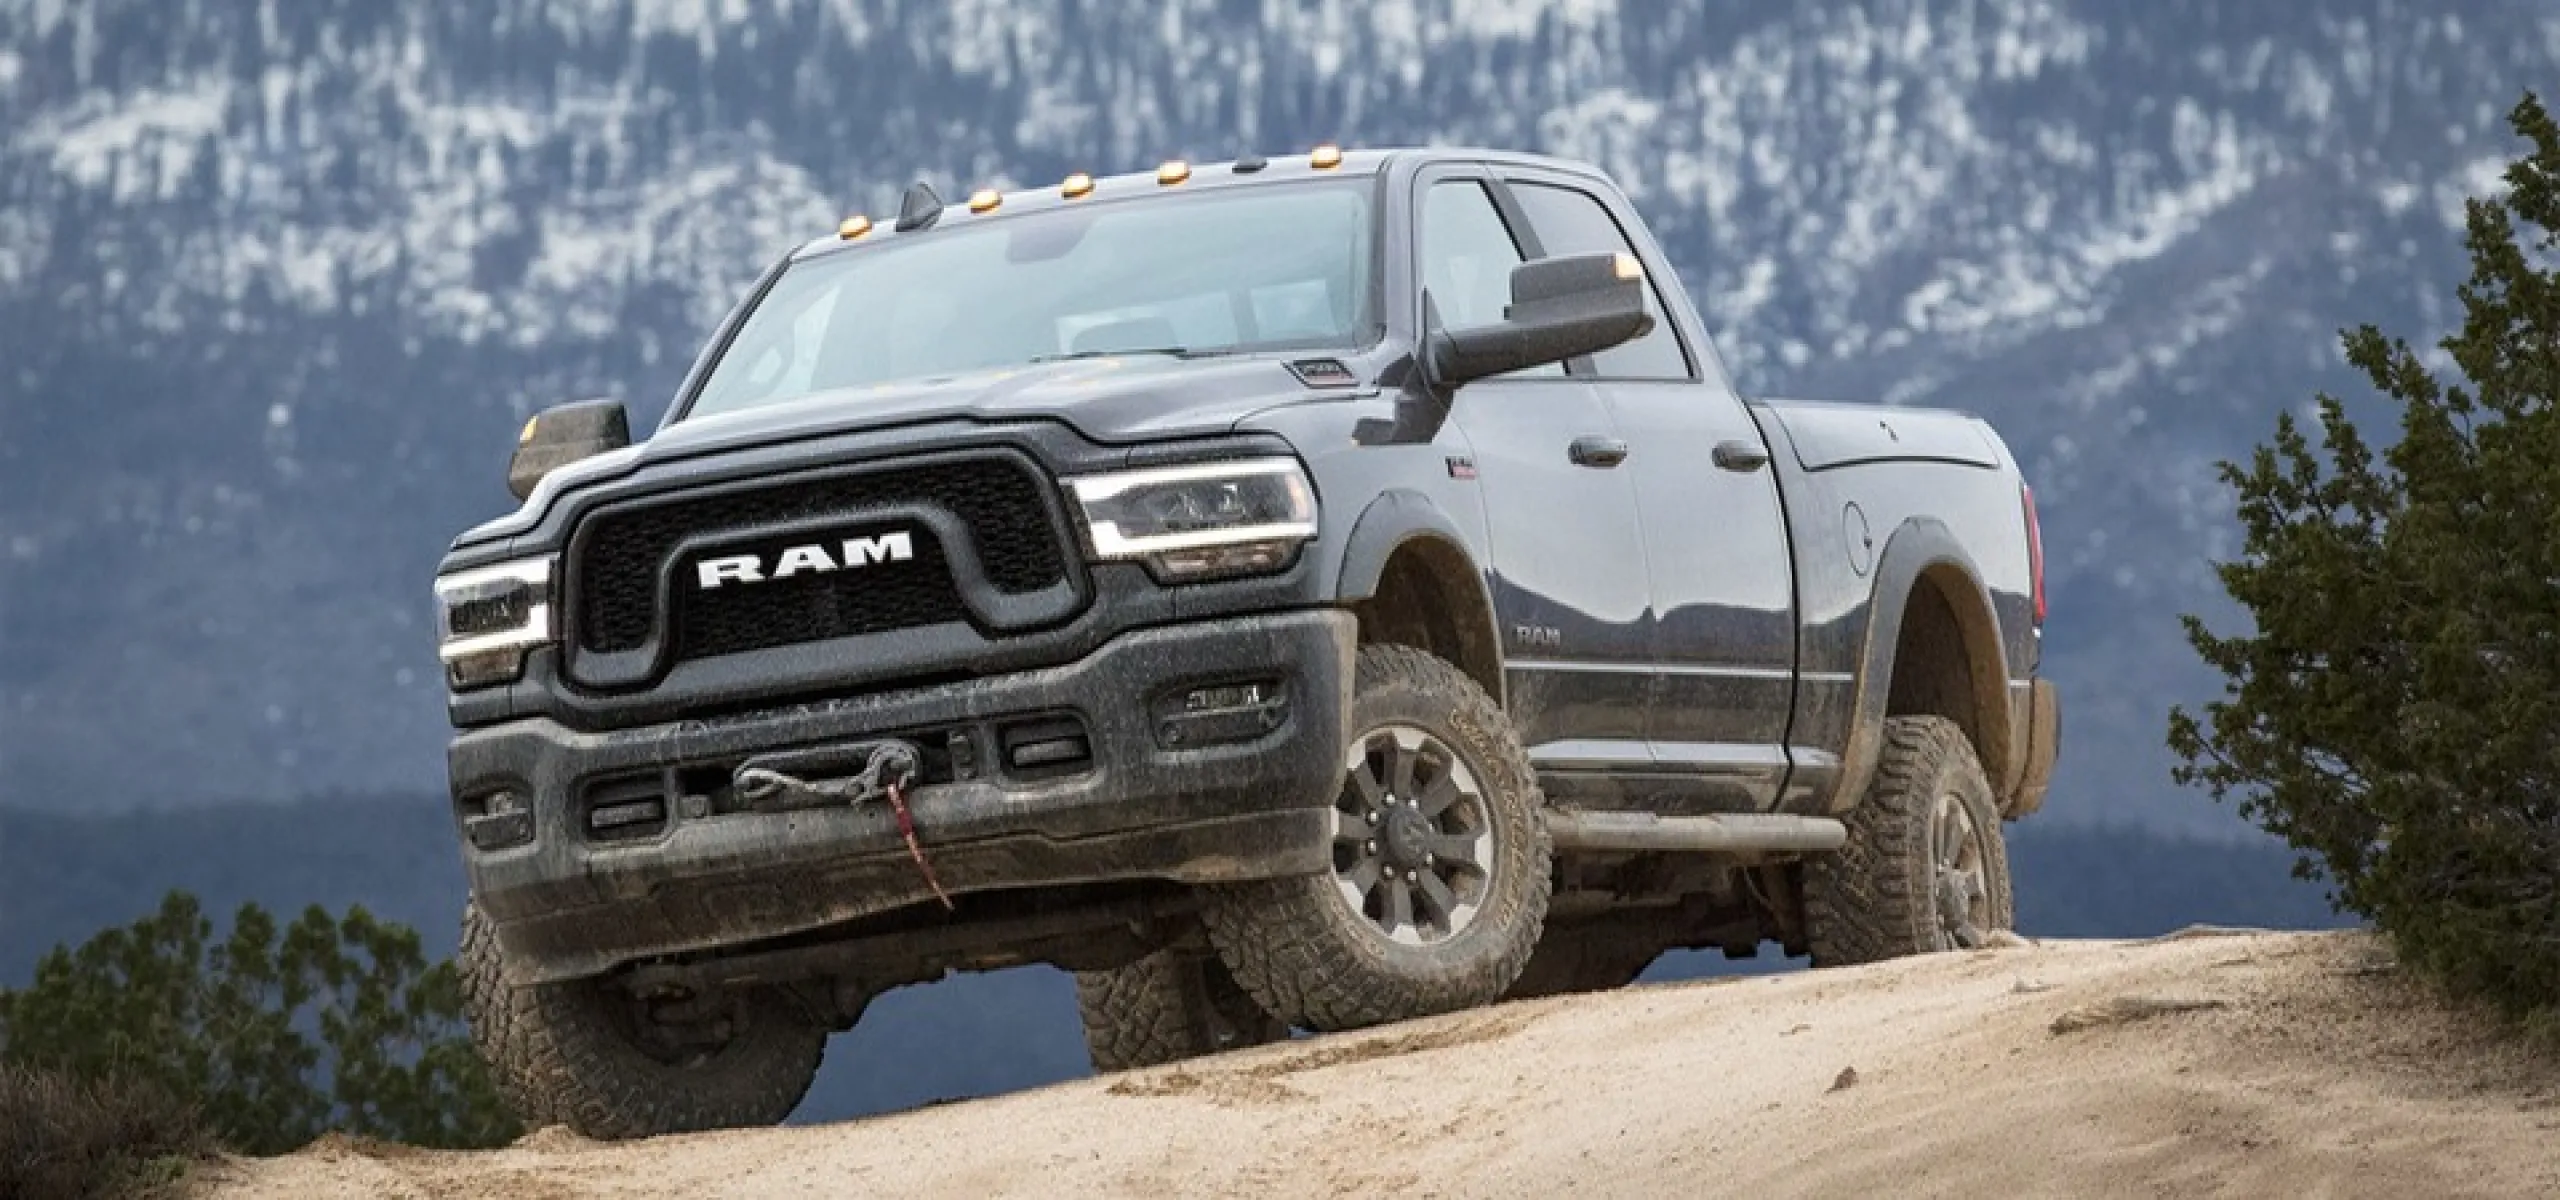 gallery-01-2022-ram-2500-exterior-gallery-extreme-off-road-capability_982f3d5c83ab493c9a71c335e7807c17-960x640